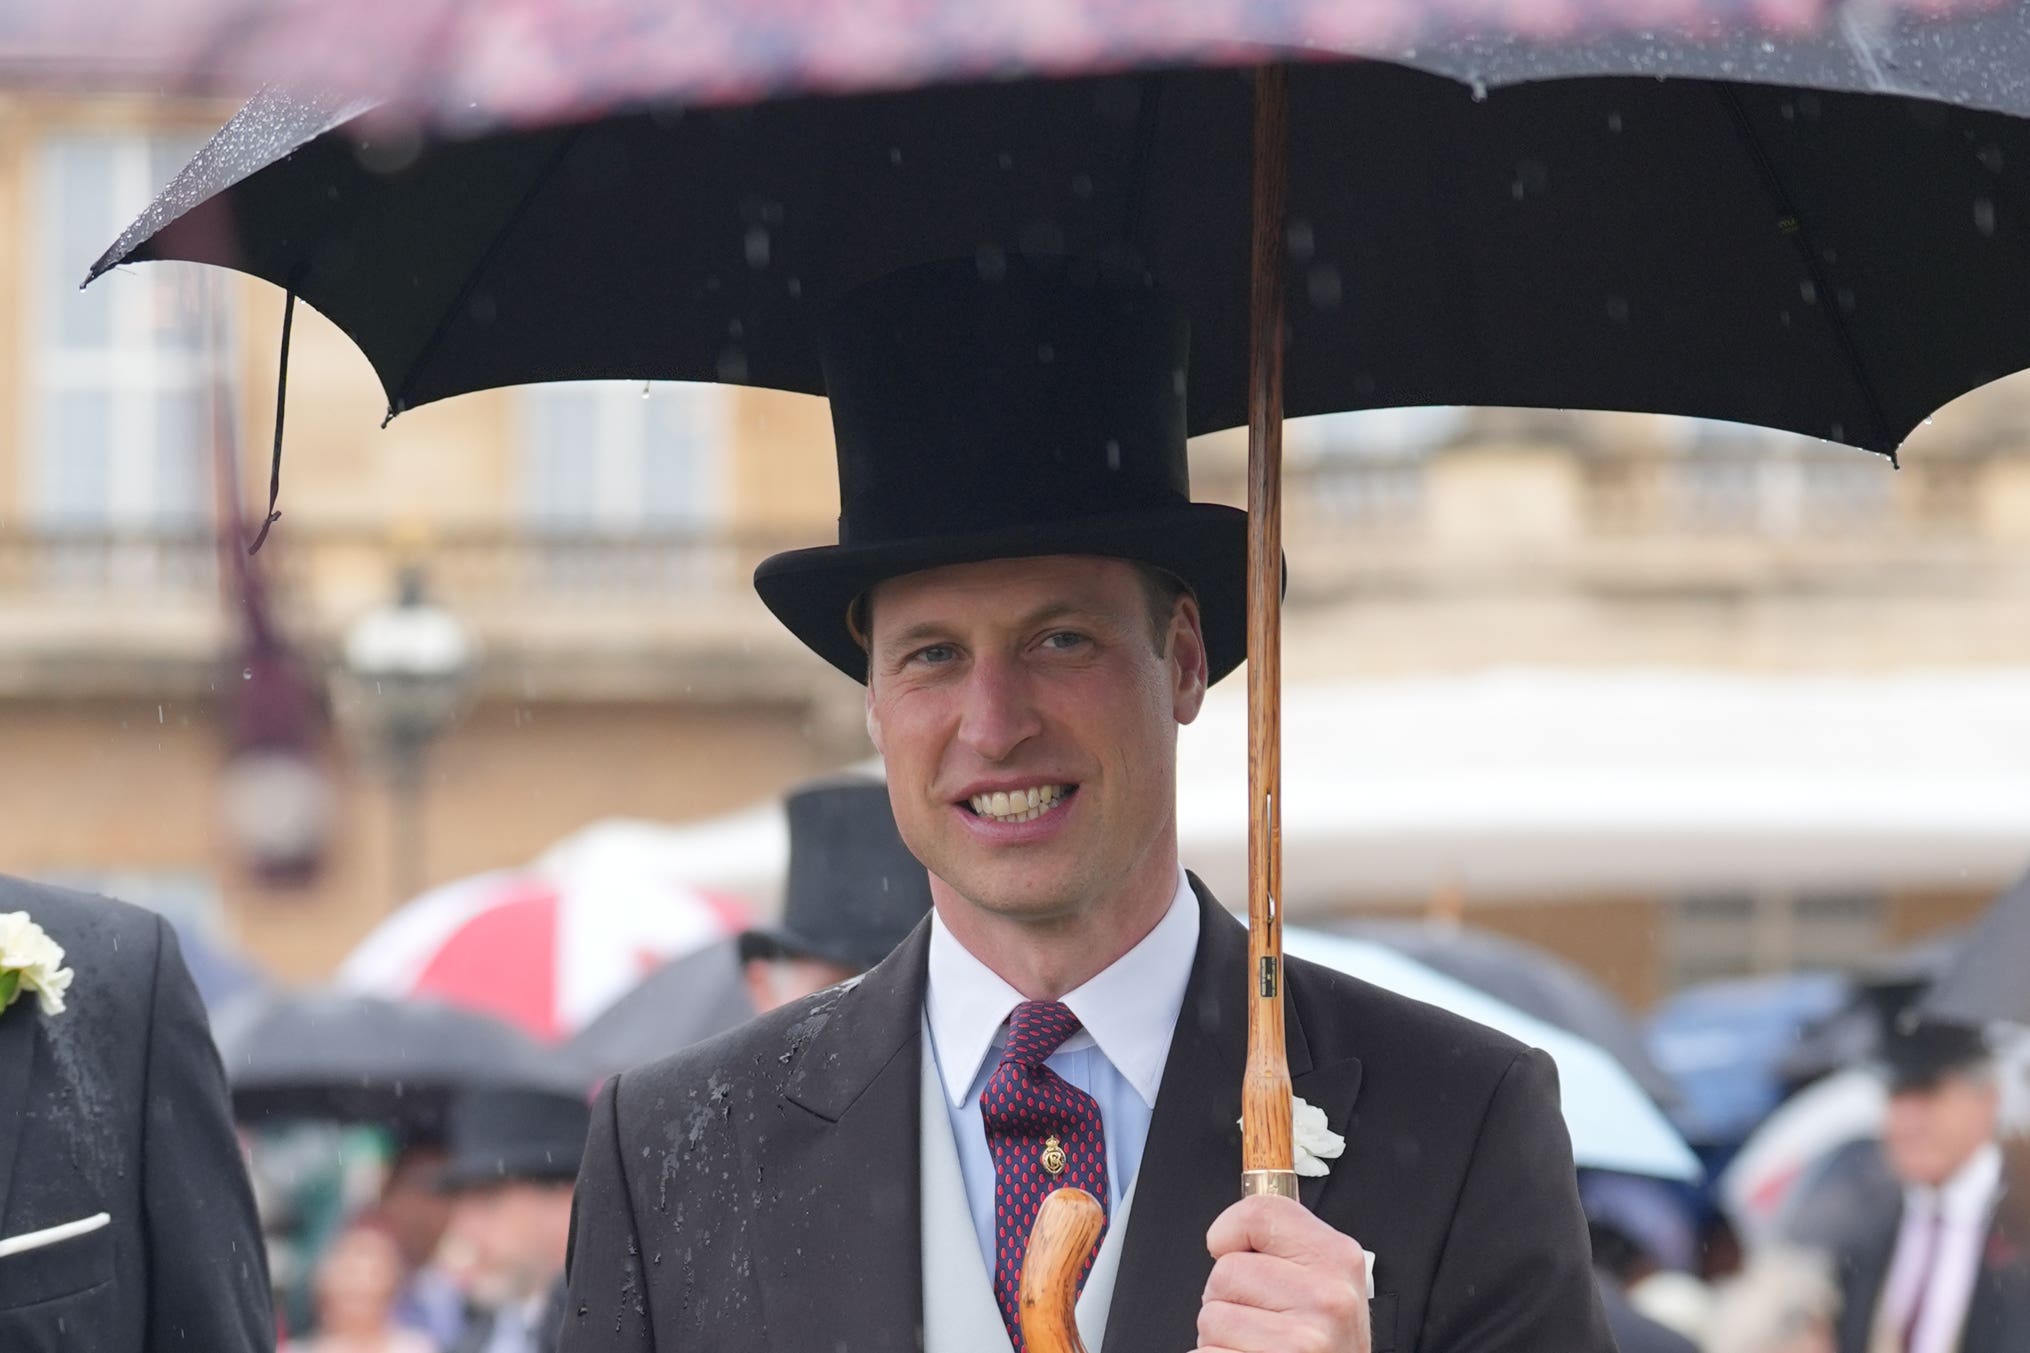 The Prince of Wales uses an umbrella during the Sovereign’s Garden Party (Yui Mok/PA)